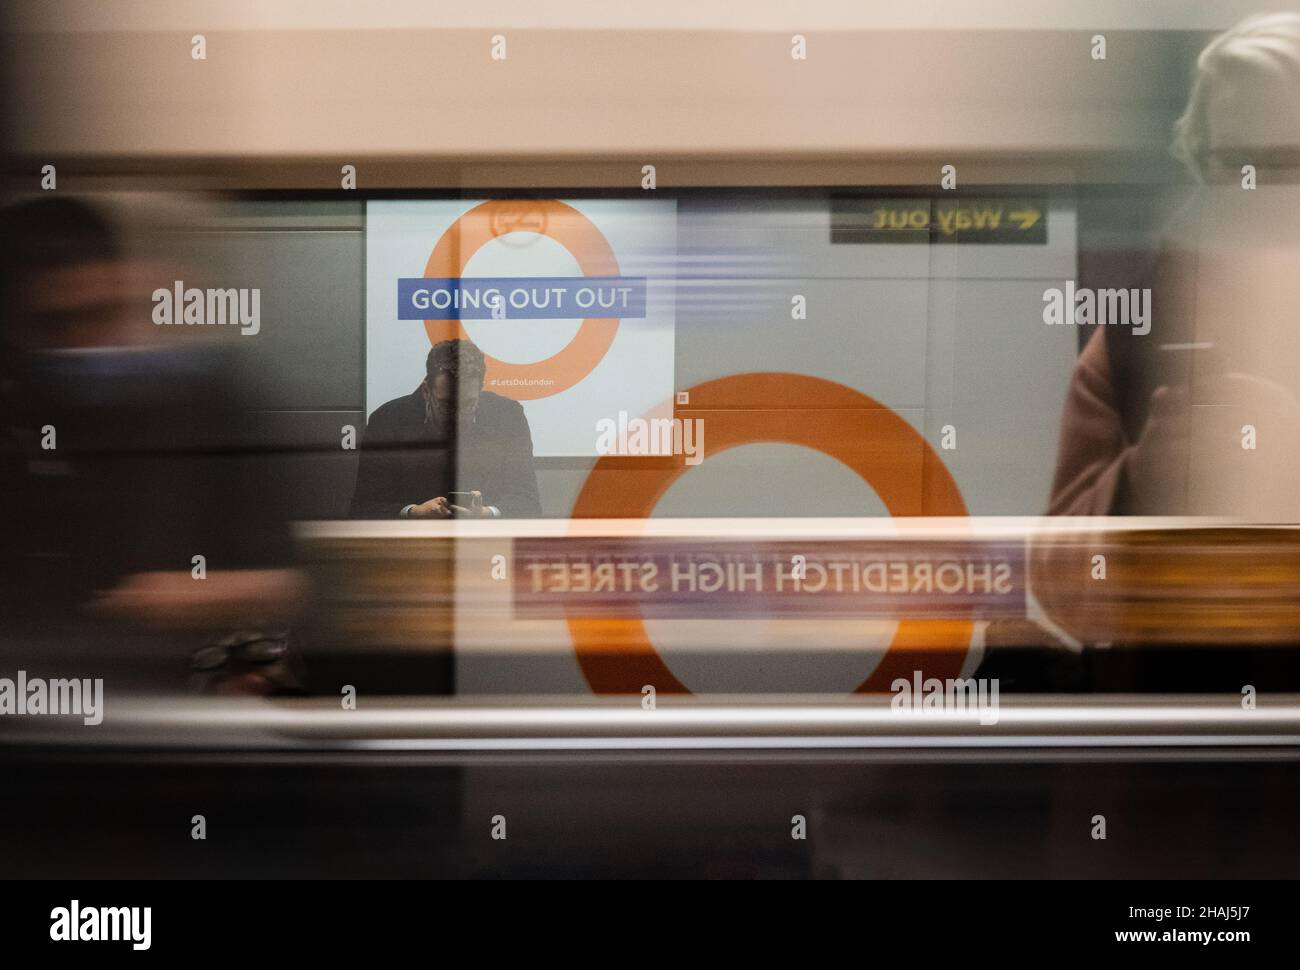 Shoreditch High Street station, 'Going Out Out' roundel on platform.  November 3, 2021.  Photo: Eleanor Bentall  Tel: +44 7768 377413. NB: NO CONSENT Stock Photo